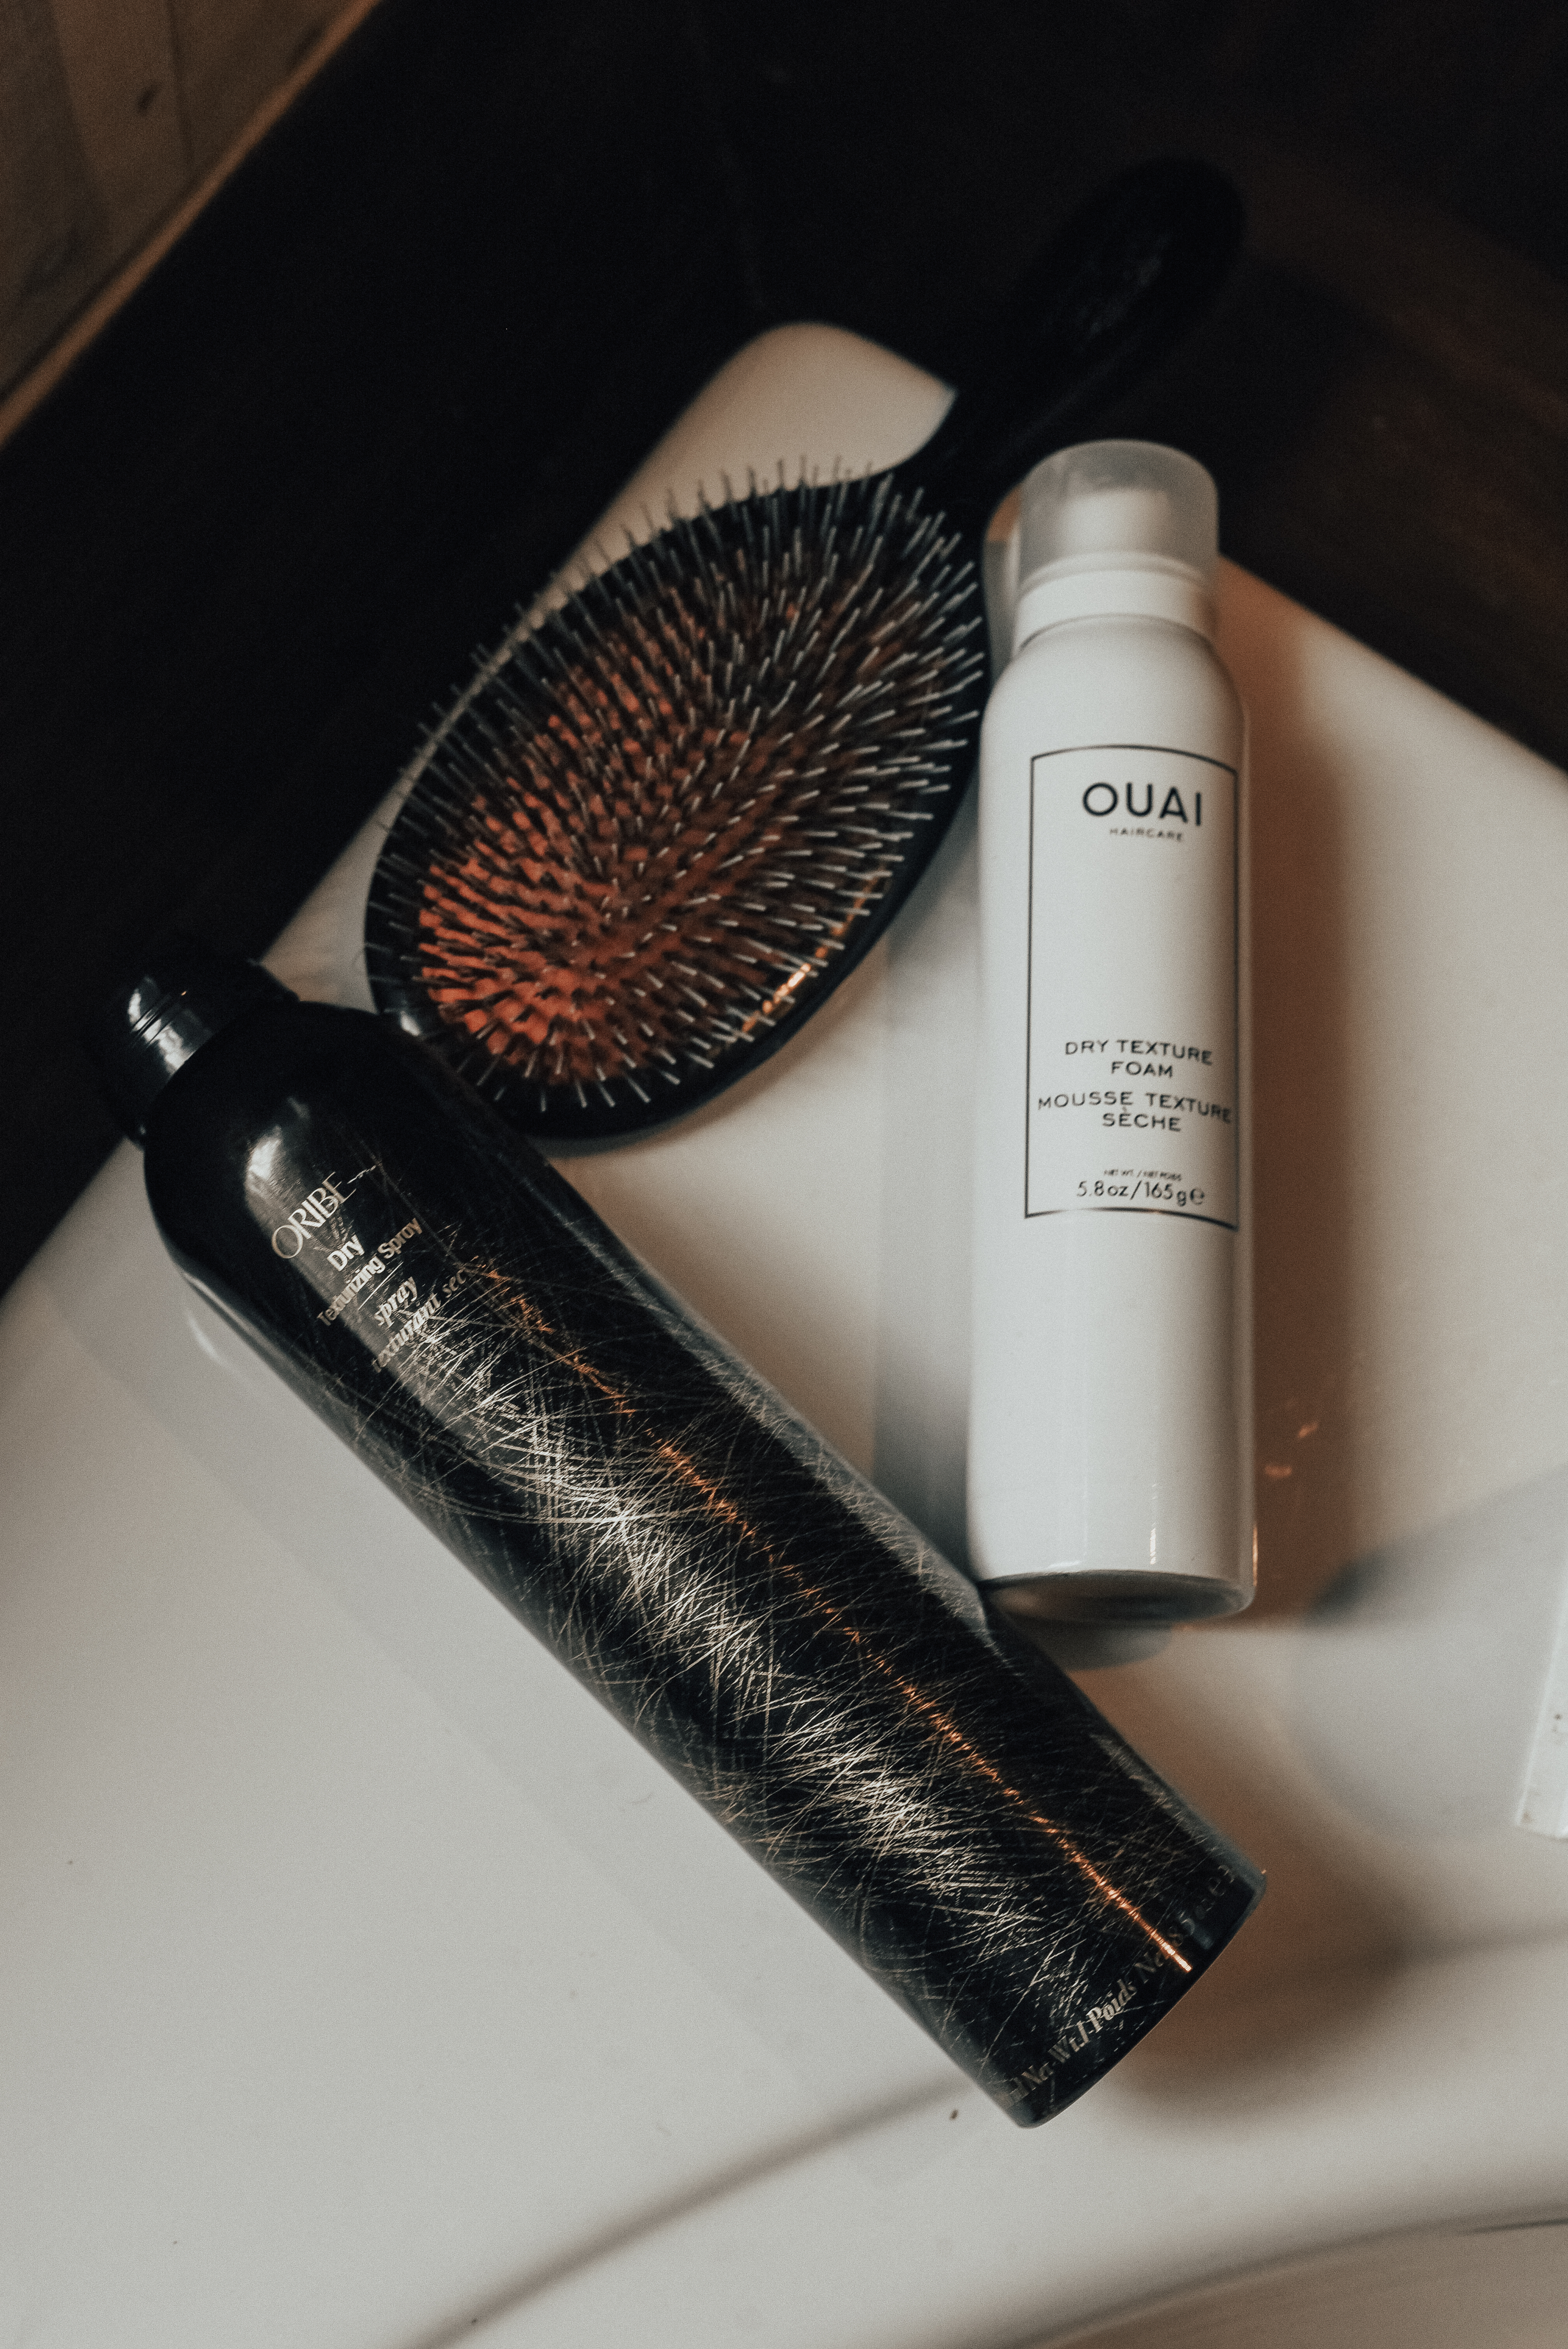 hair products dry hair damaged hair strengthen hair ouai dry texture foam oribe texture spray leonor greyl styling cream living proof instant protection gisou hair oil not your standard blog blogger kayla seah review beauty